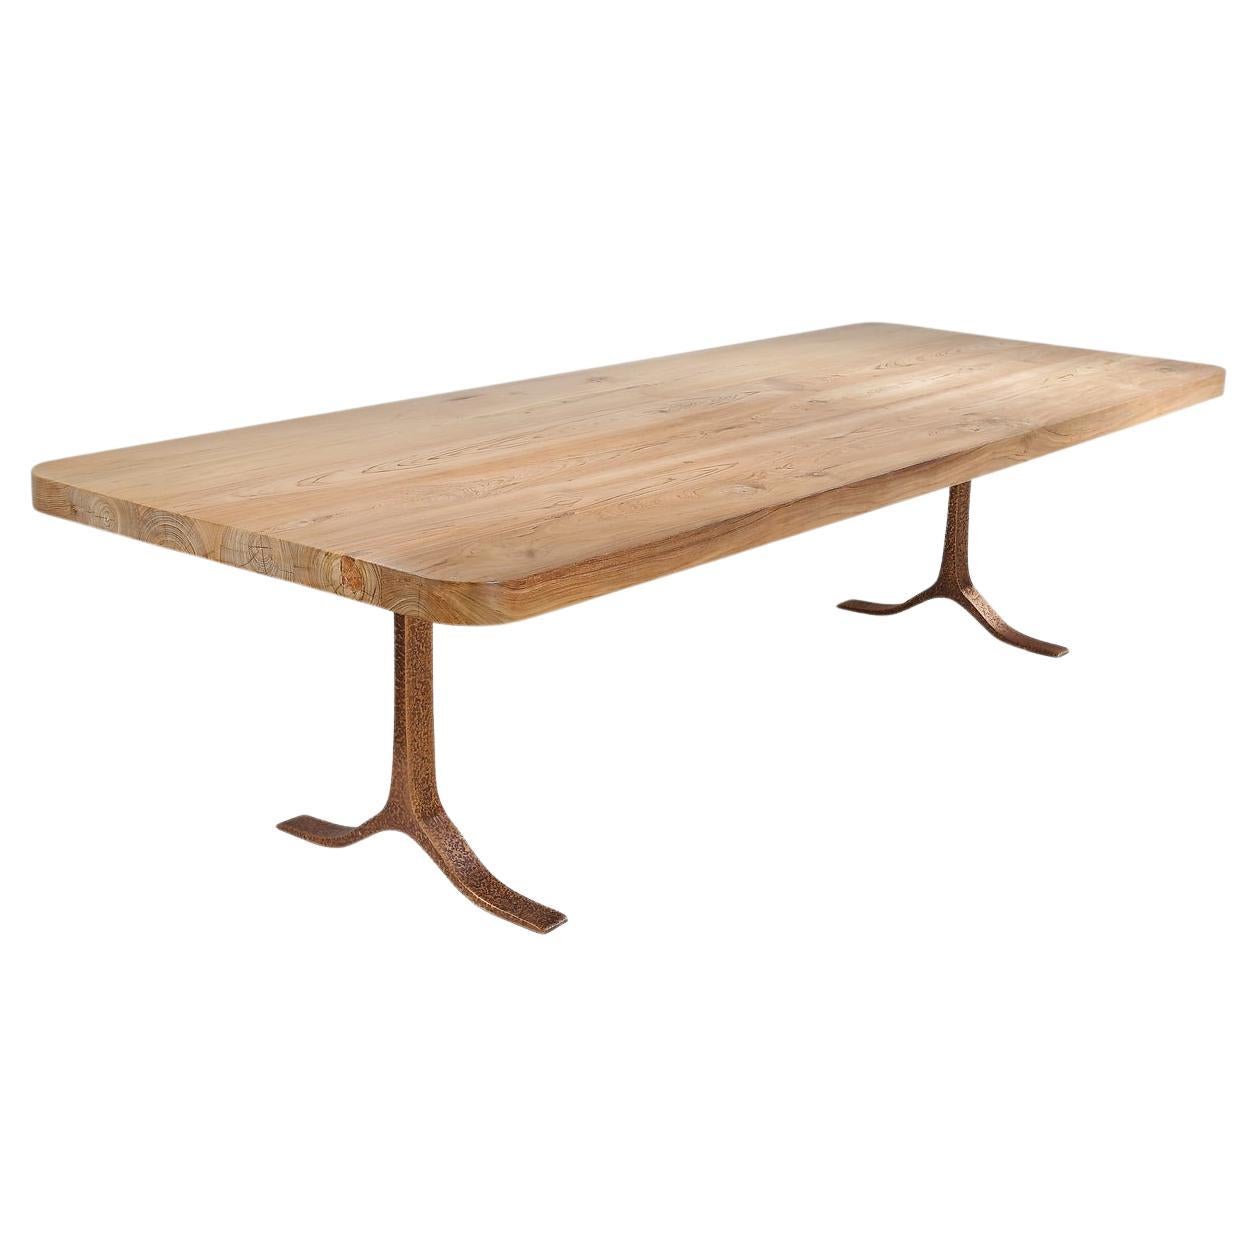 Bespoke Dining Table, Reclaimed Wood, Sand Cast Bronze Base, by P. Tendercool For Sale